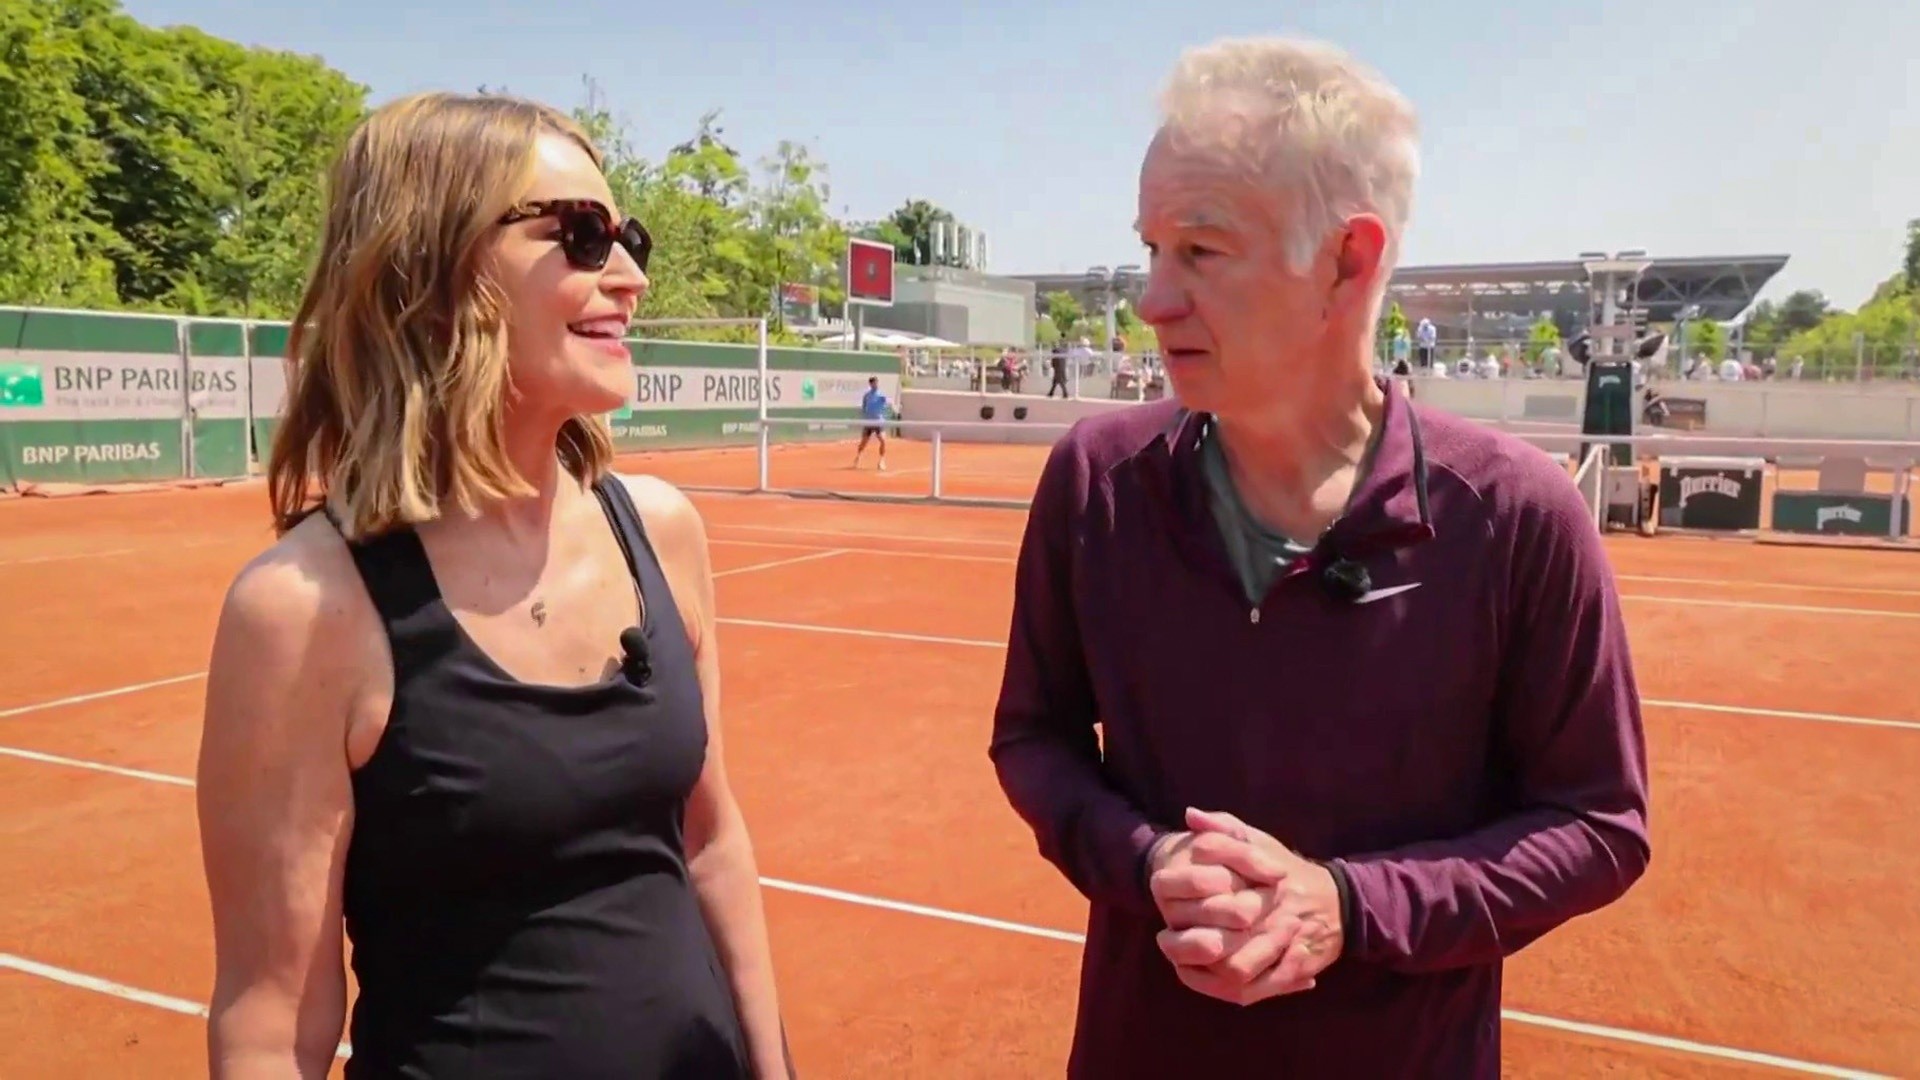 Go behind the scenes of tennis French Open at Roland Garros